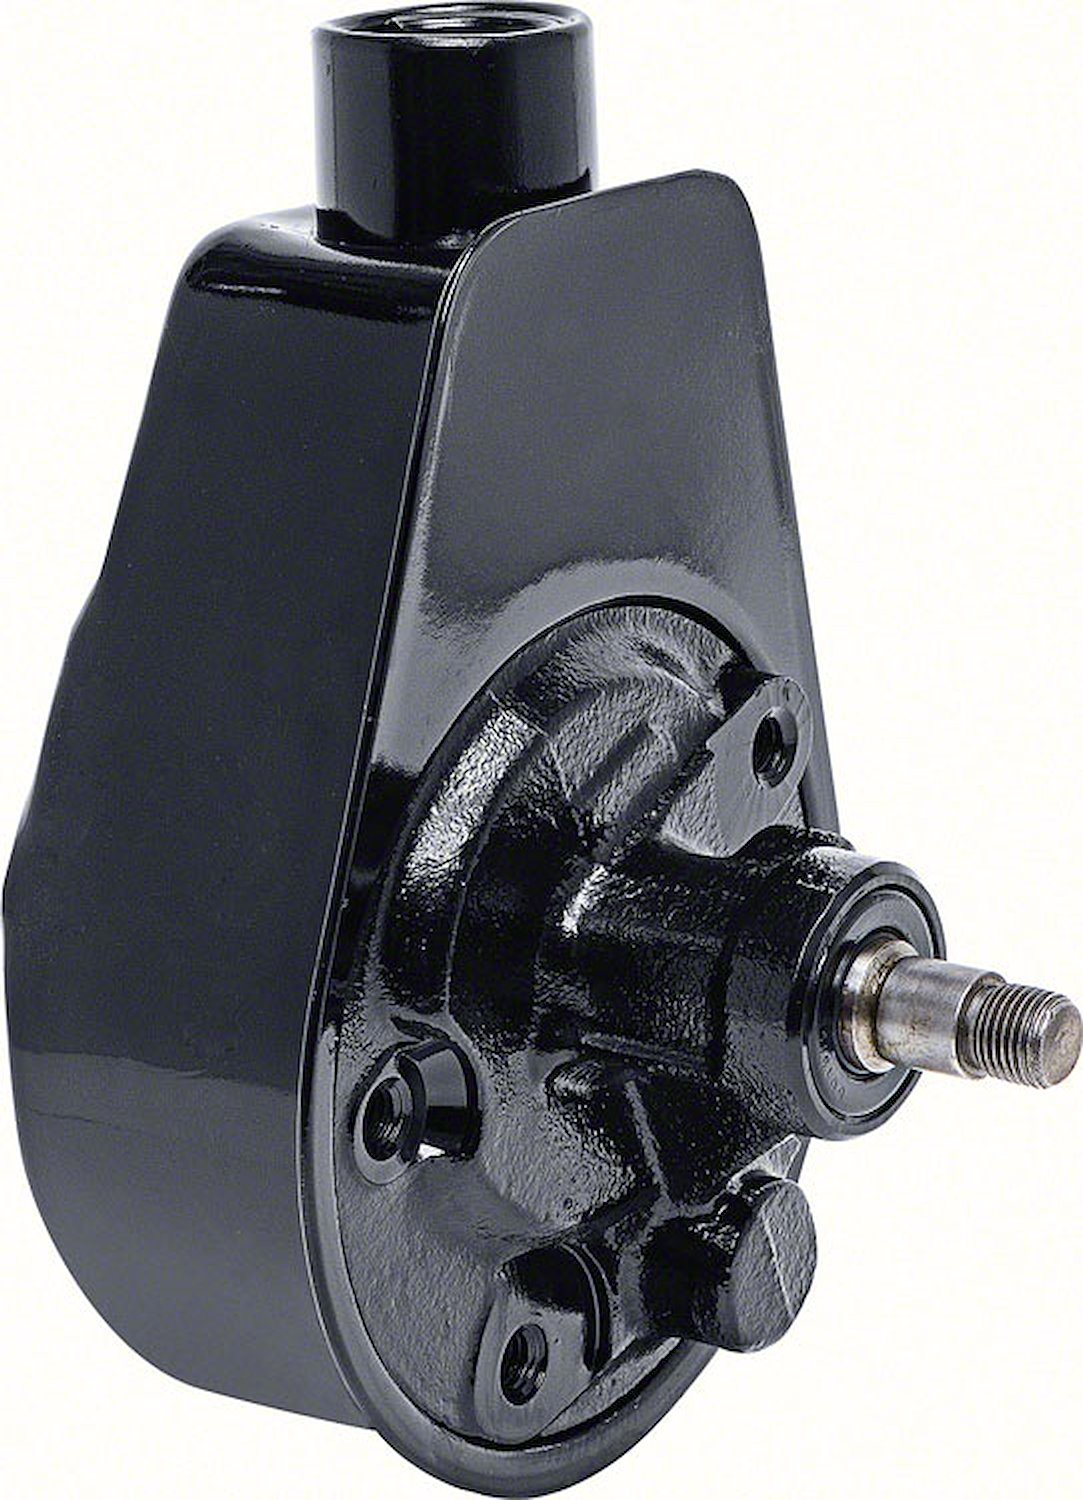 P6120 Power Steering Pump With "A-Style" Reservoir 1967-72 Remanufactured